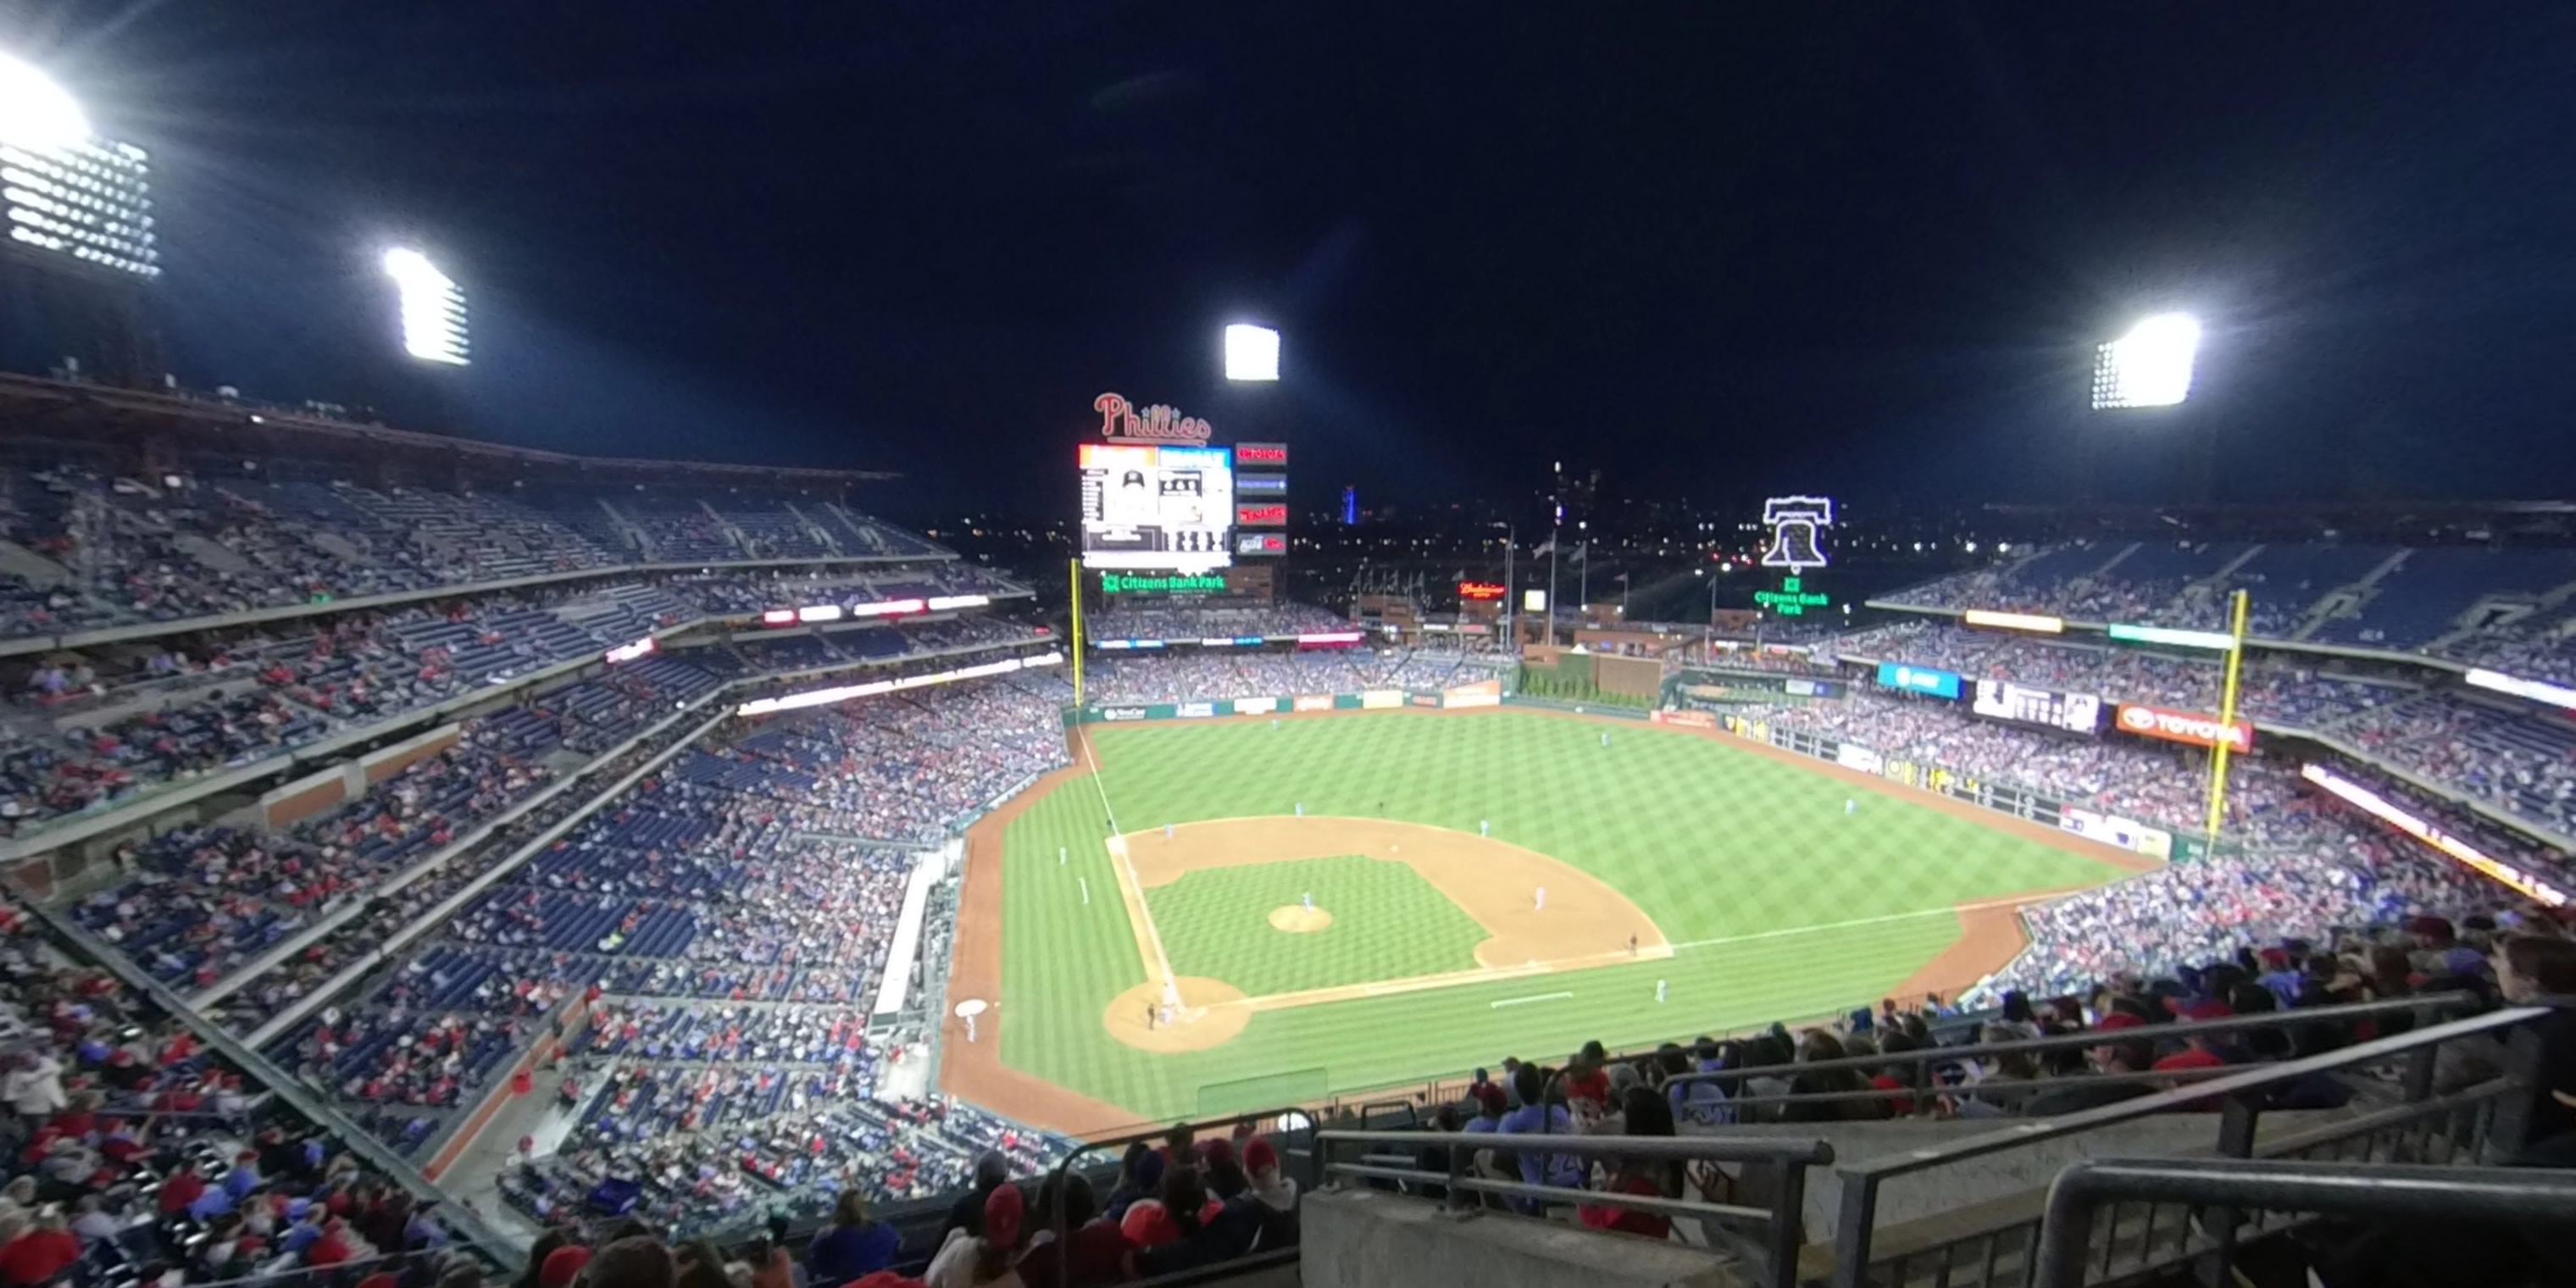 Section 417 at Citizens Bank Park 